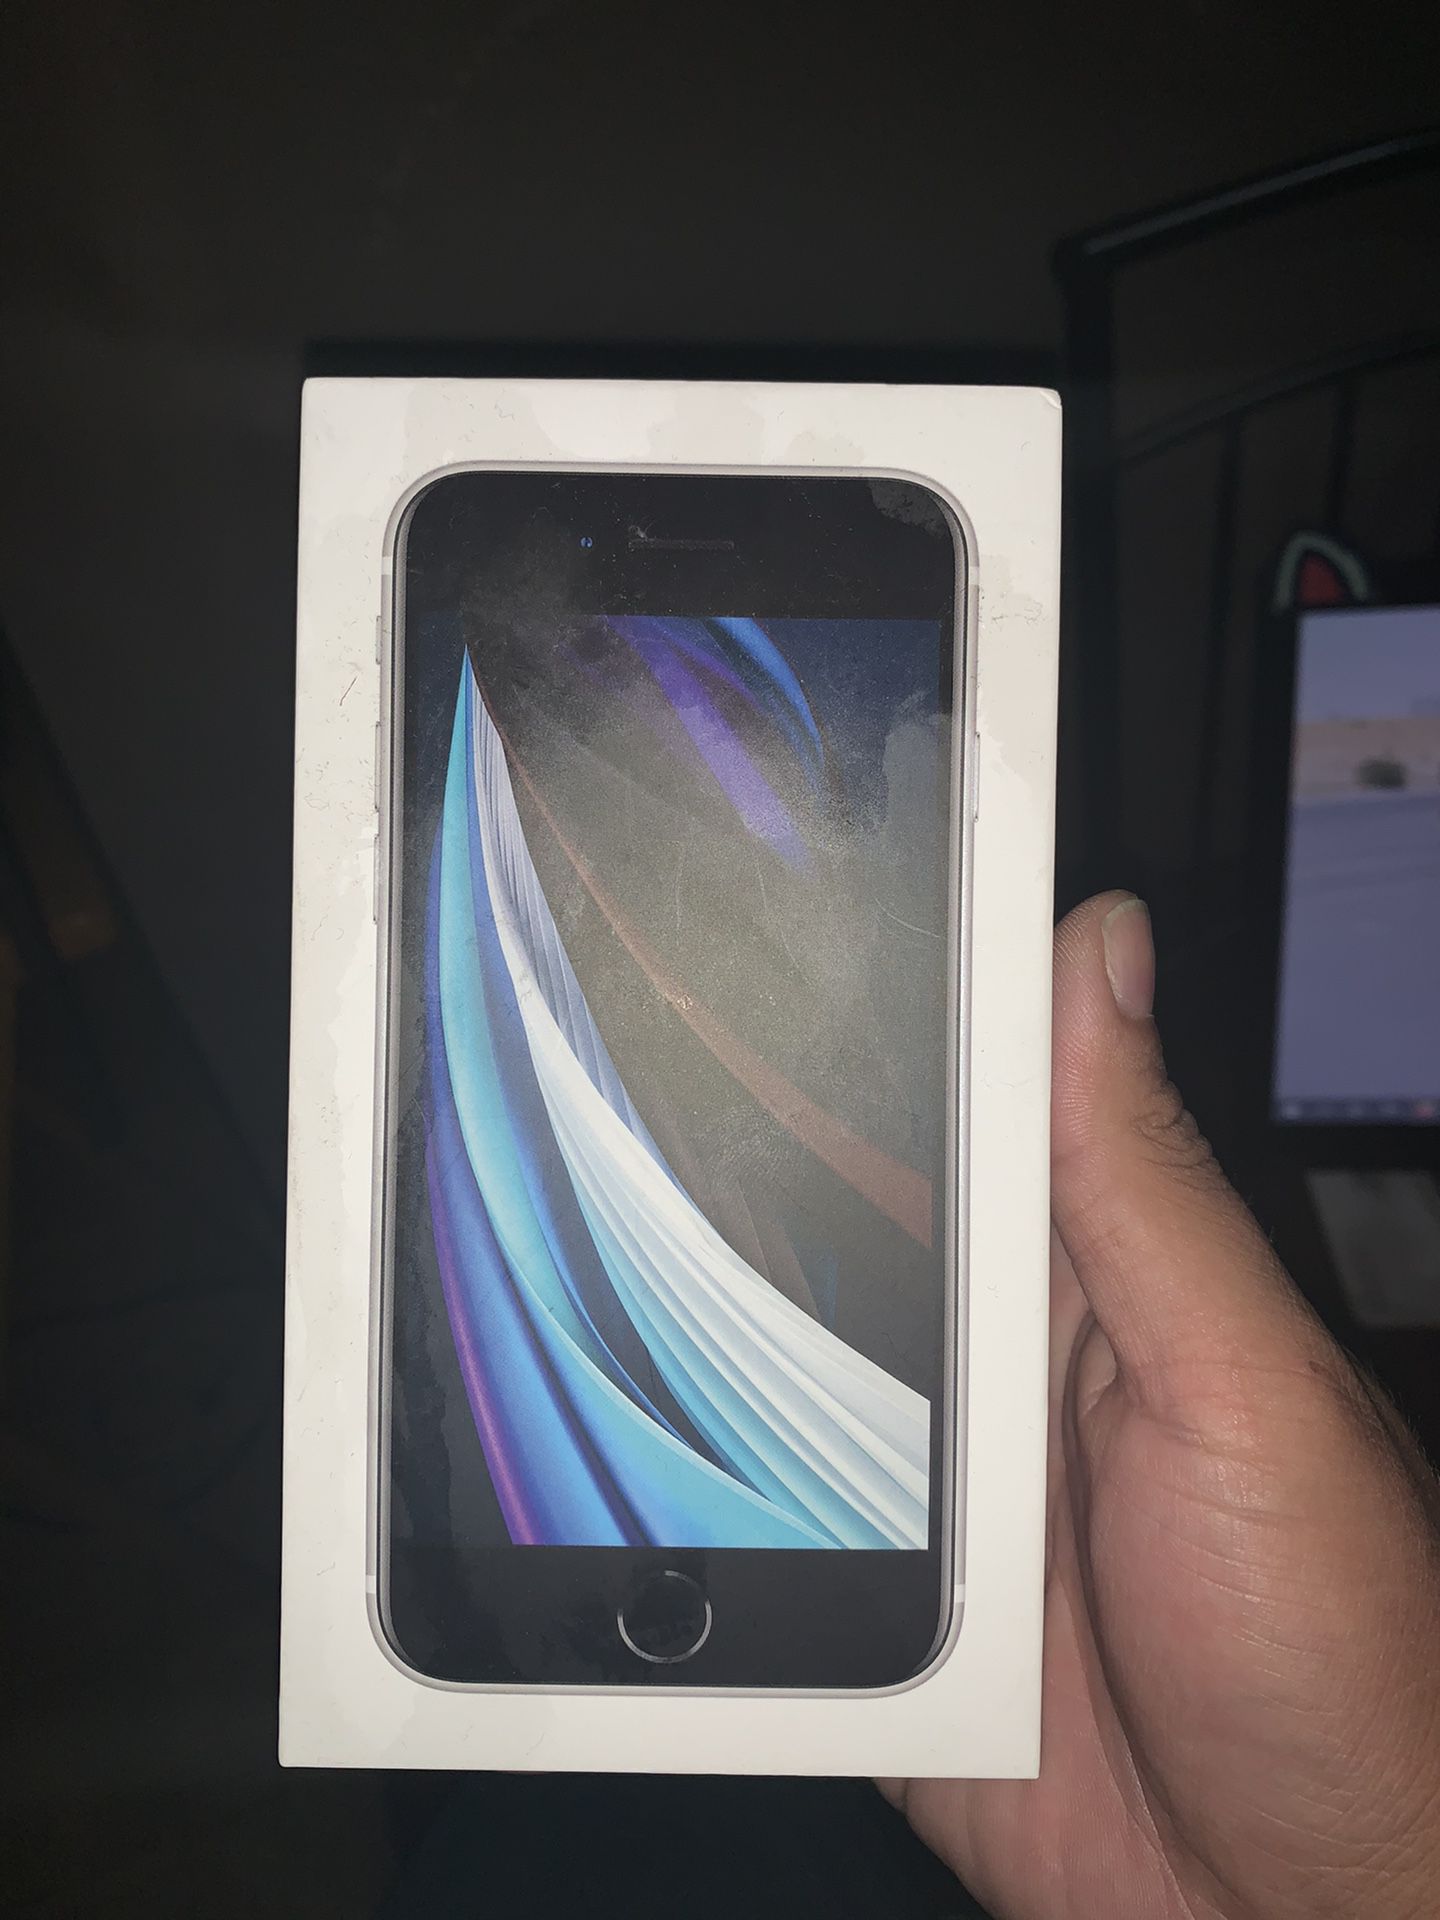 iPhone SE 2 (White, 64GB, Unlocked to use for any carrier)